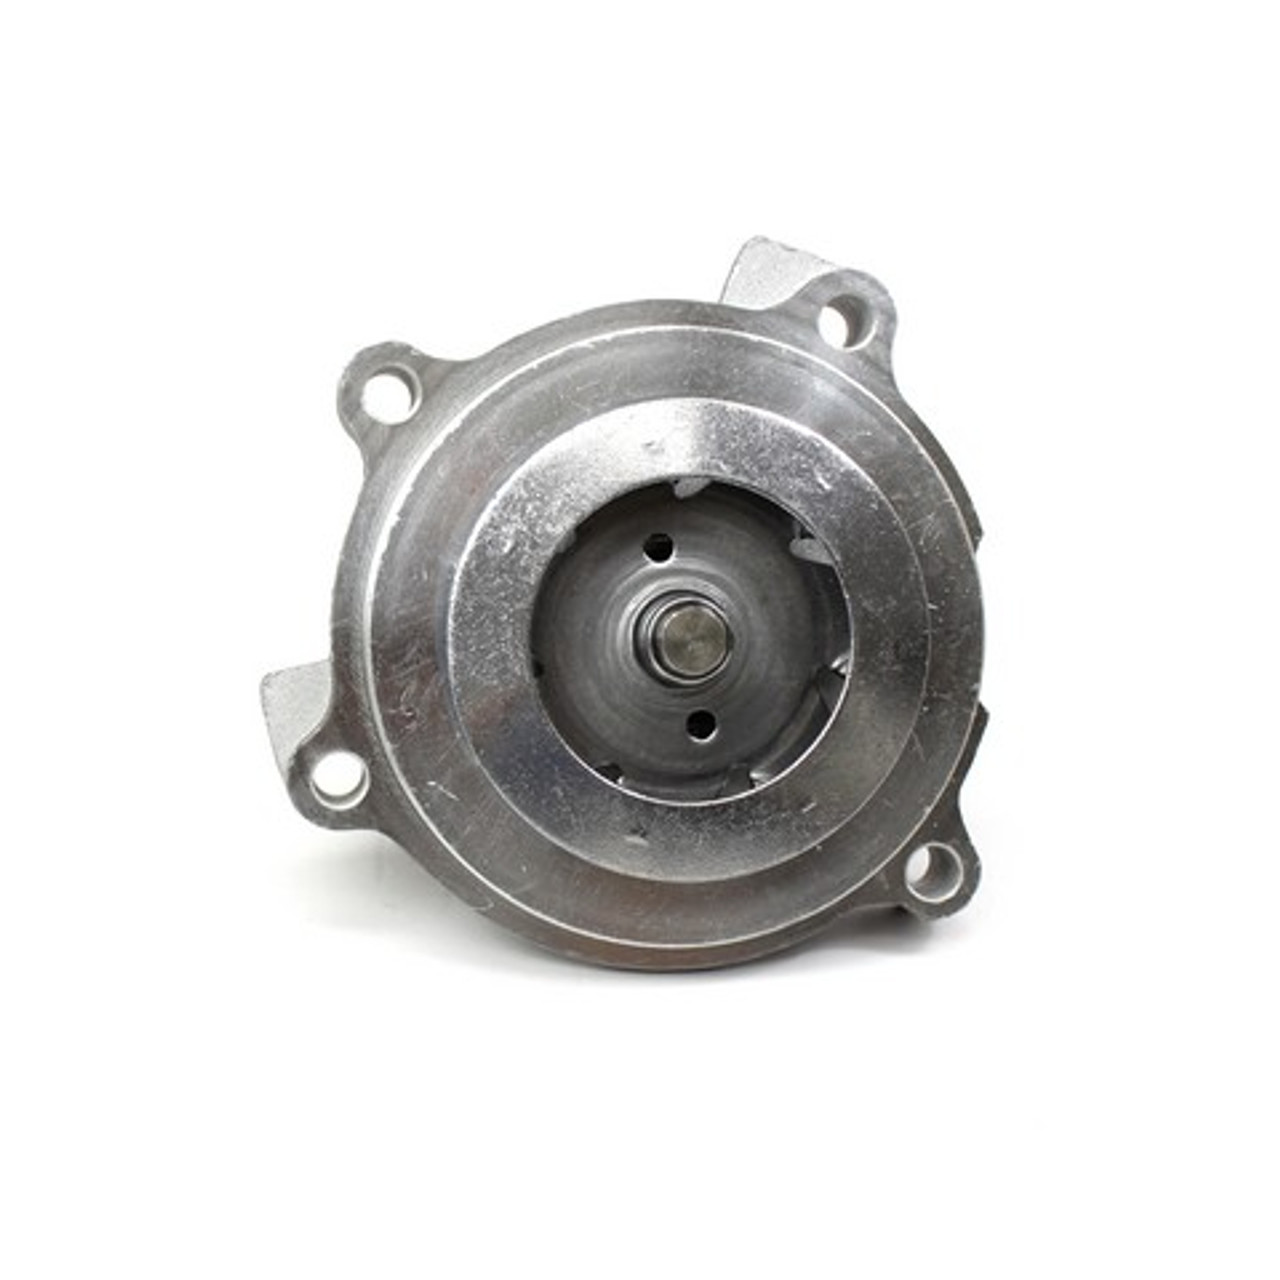 Water Pump 4.6L 2001 Ford Crown Victoria - WP4136.4